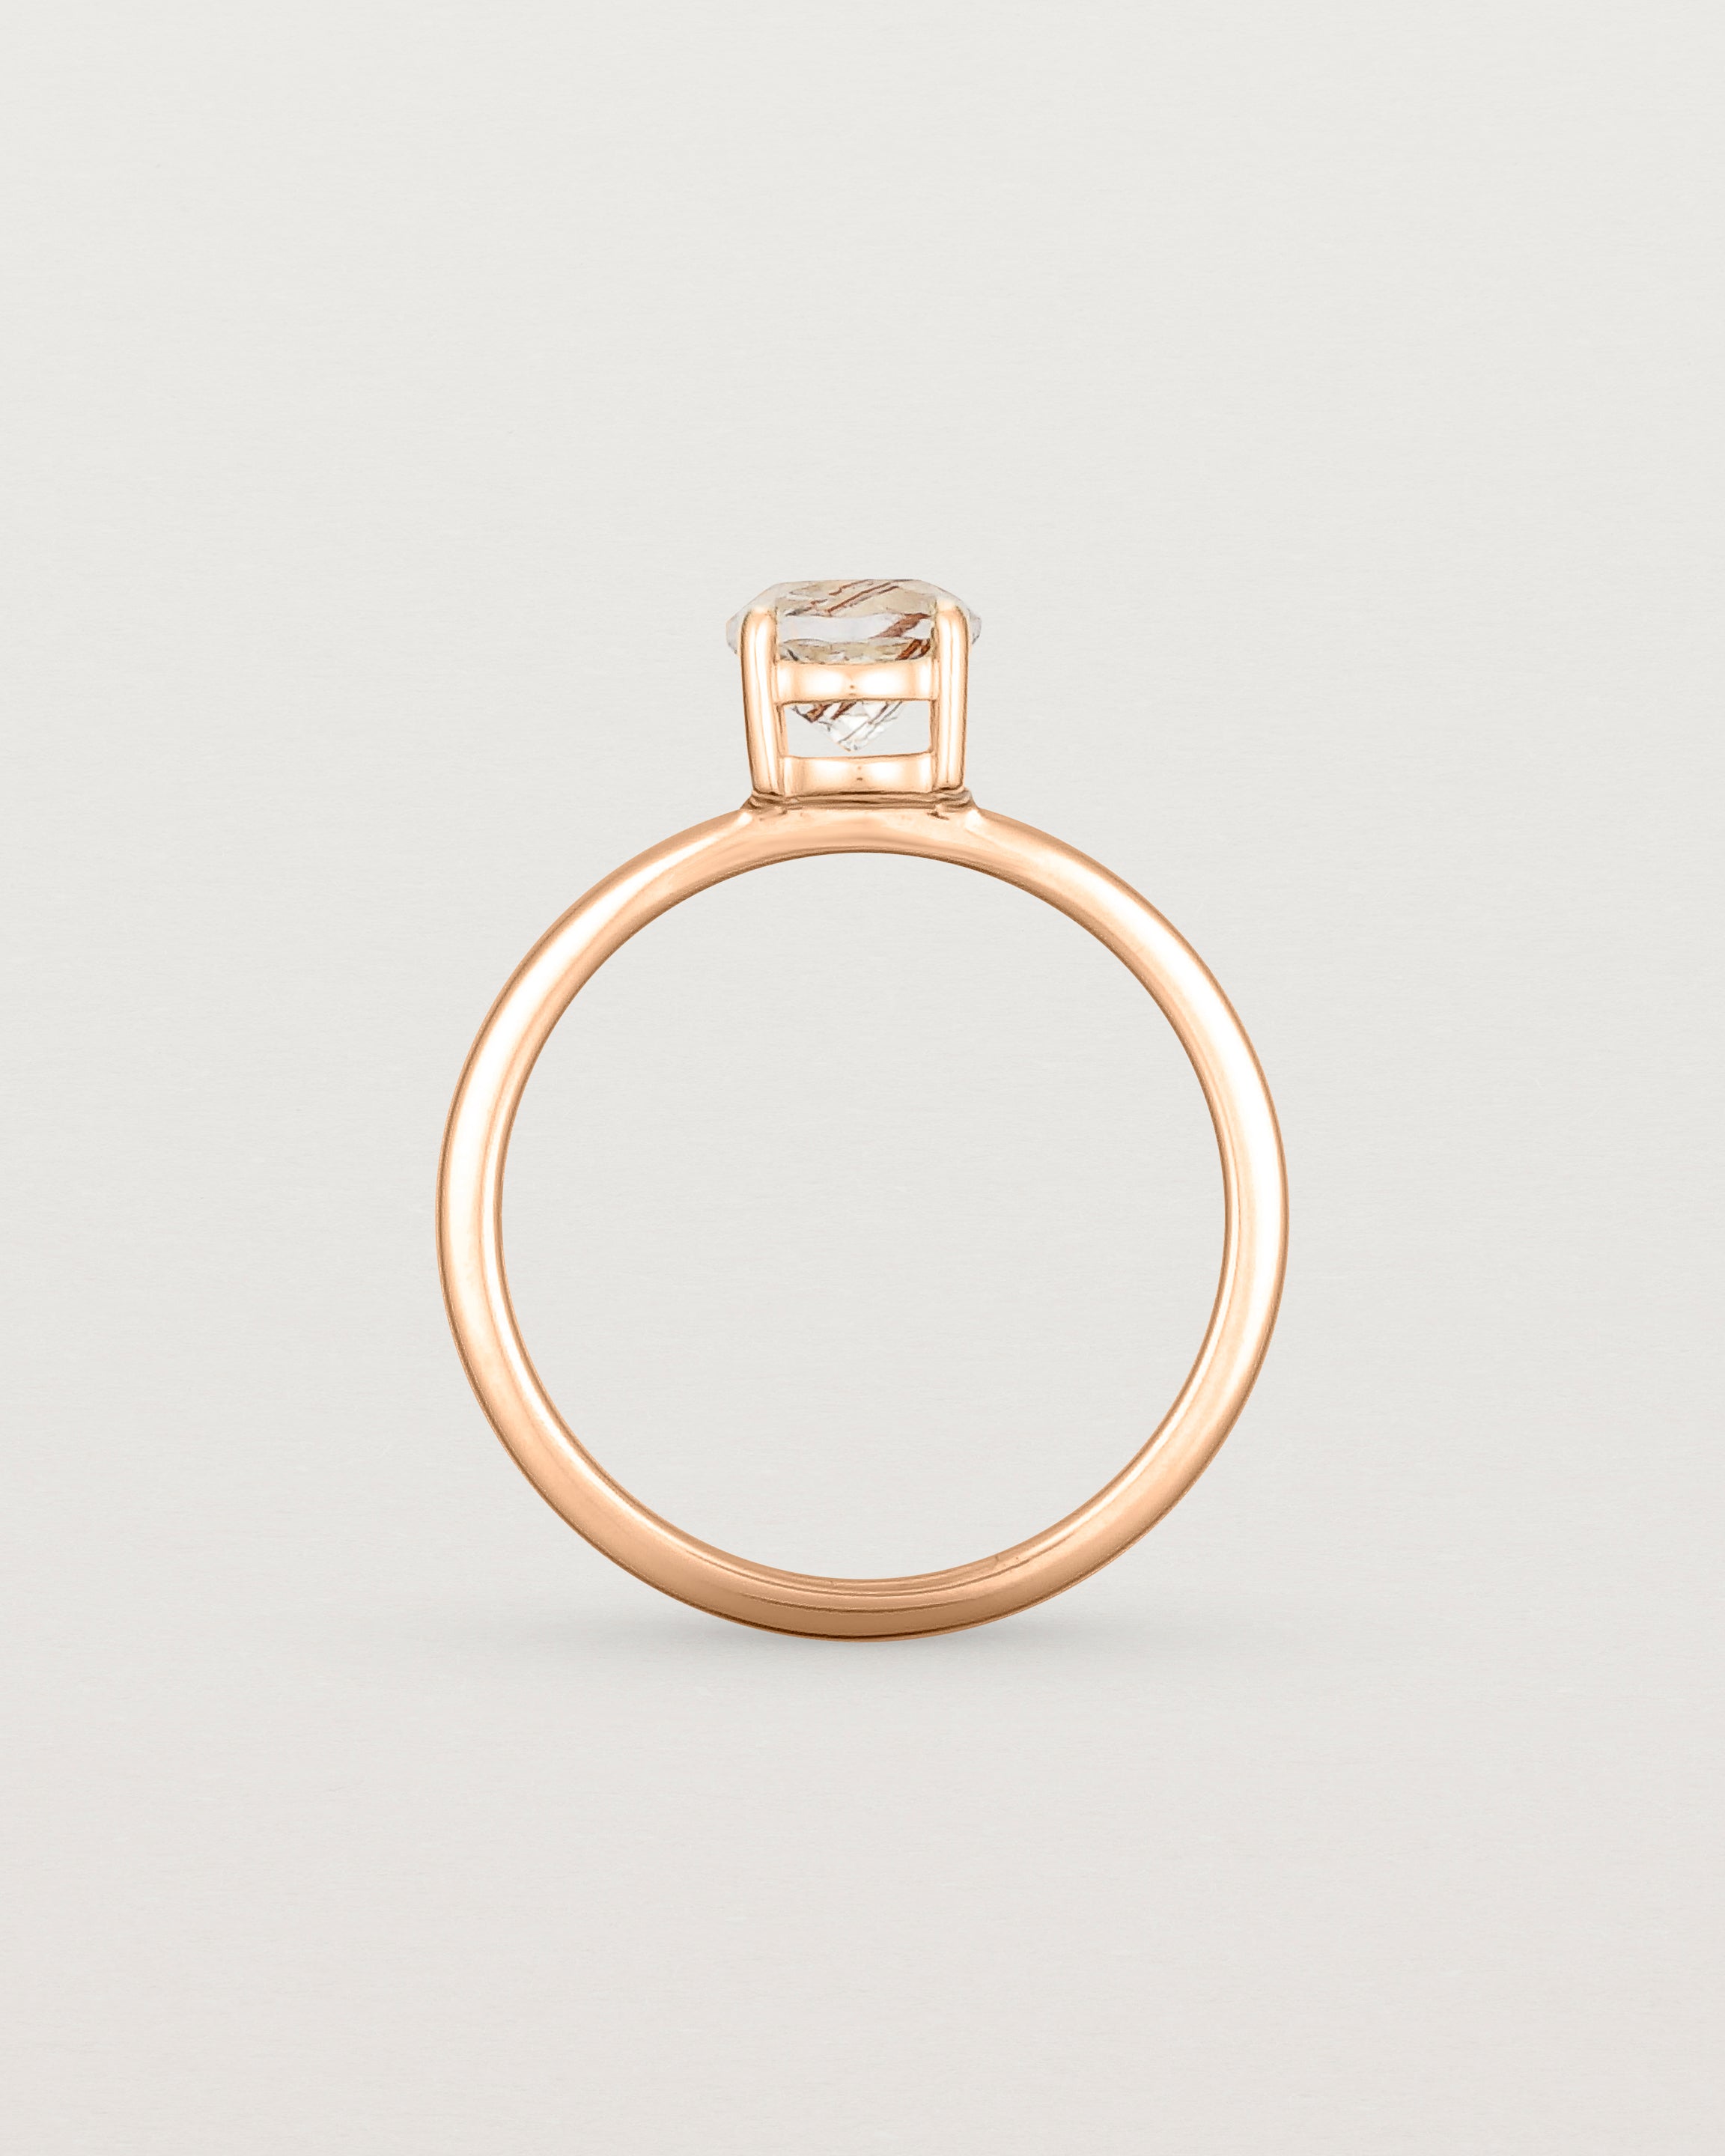 Standing view of the Petite Una Round Solitaire | Rutilated Quartz | Rose Gold.